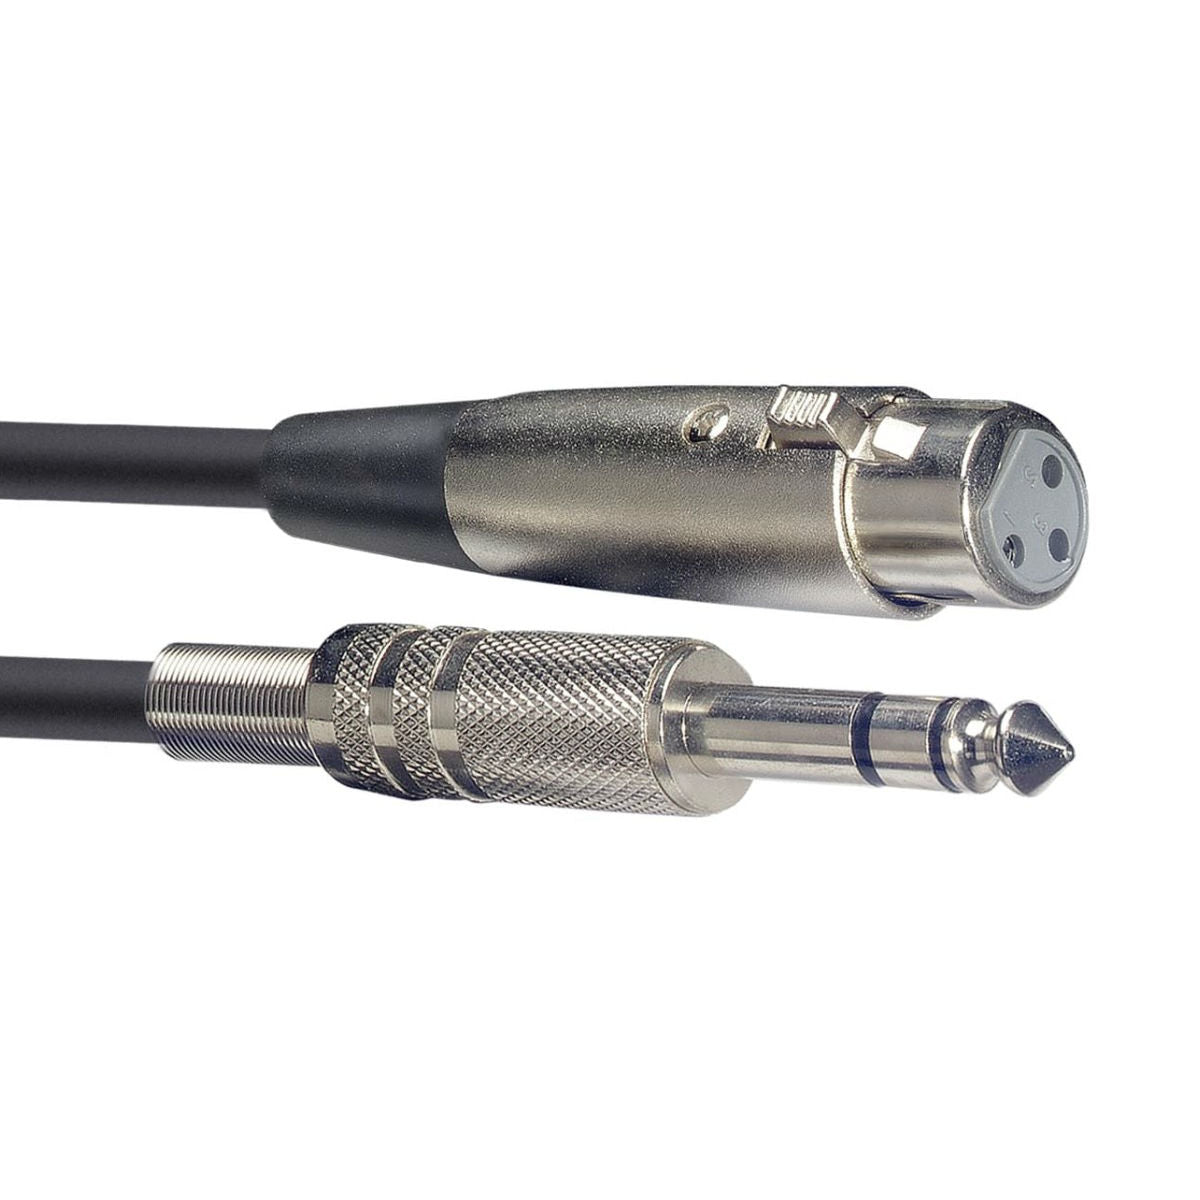 Stagg SAC3PSXF XLR Female to Balanced Jack Cable 3m